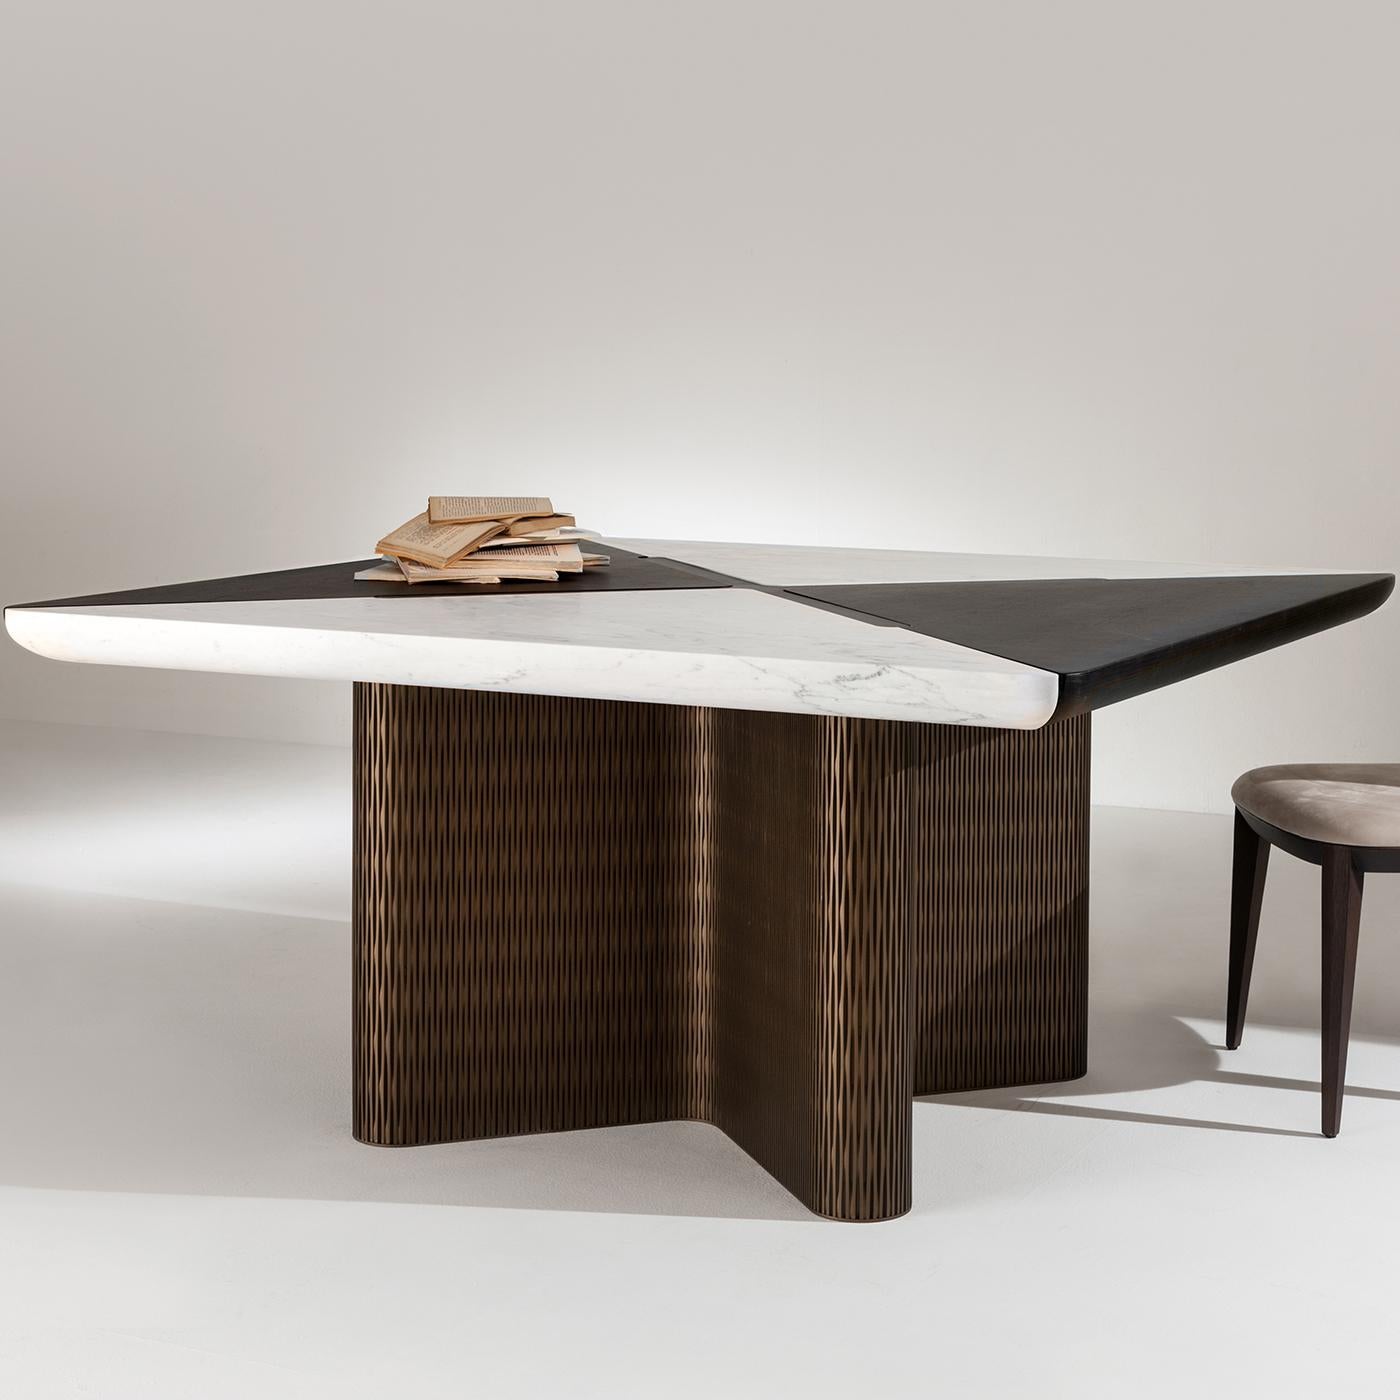 This beautiful square dining table features a table top in four contrasting white and black sections of matte marble. The two rests on a wood structure that is undulating and covered in a bronze lacquer for a metal-like effect. A beautiful piece